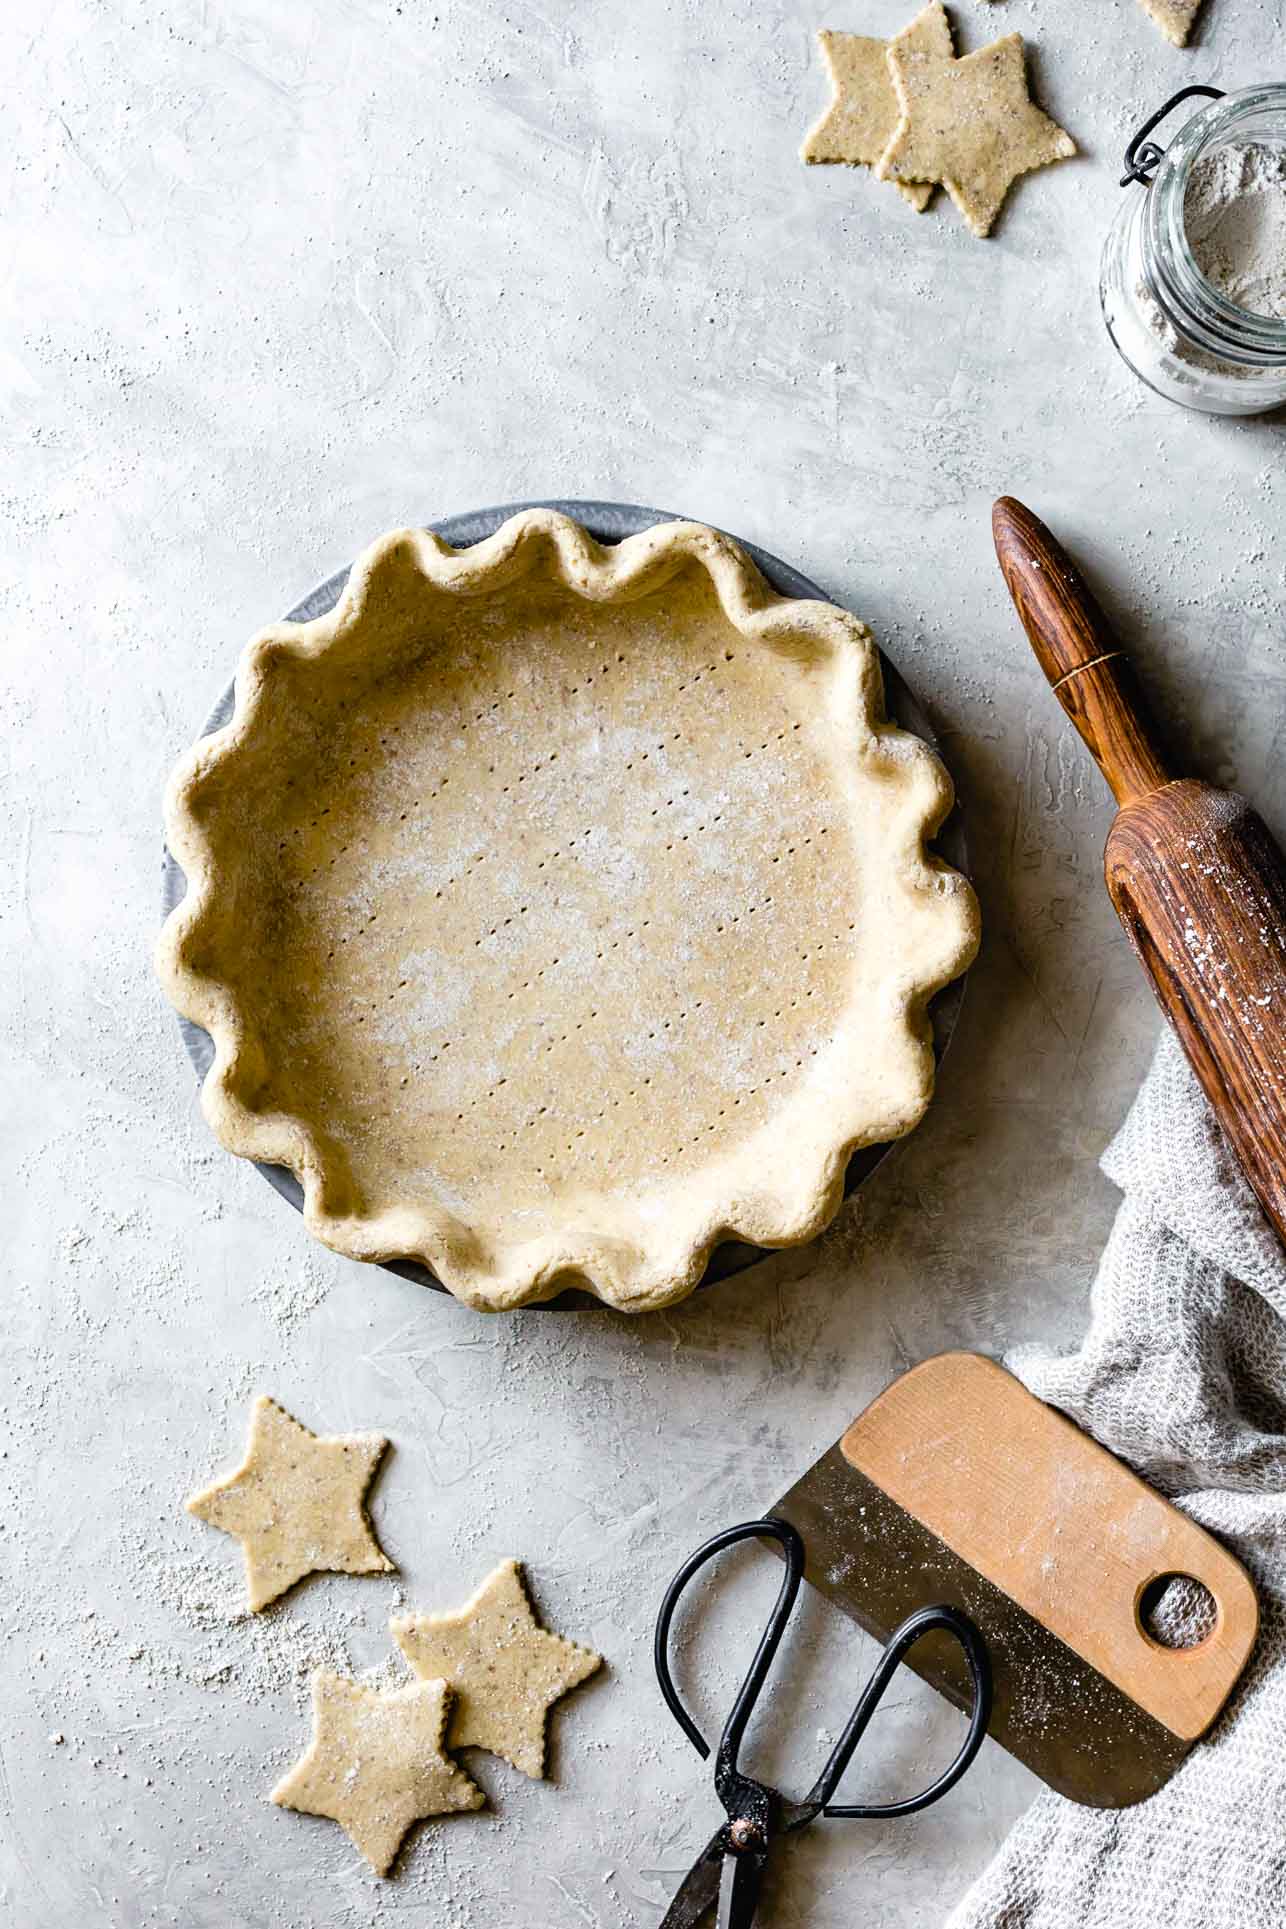 an unbaked gluten-free pie crust made with sweet rice, millet, and oat flours sits on a plaster surface